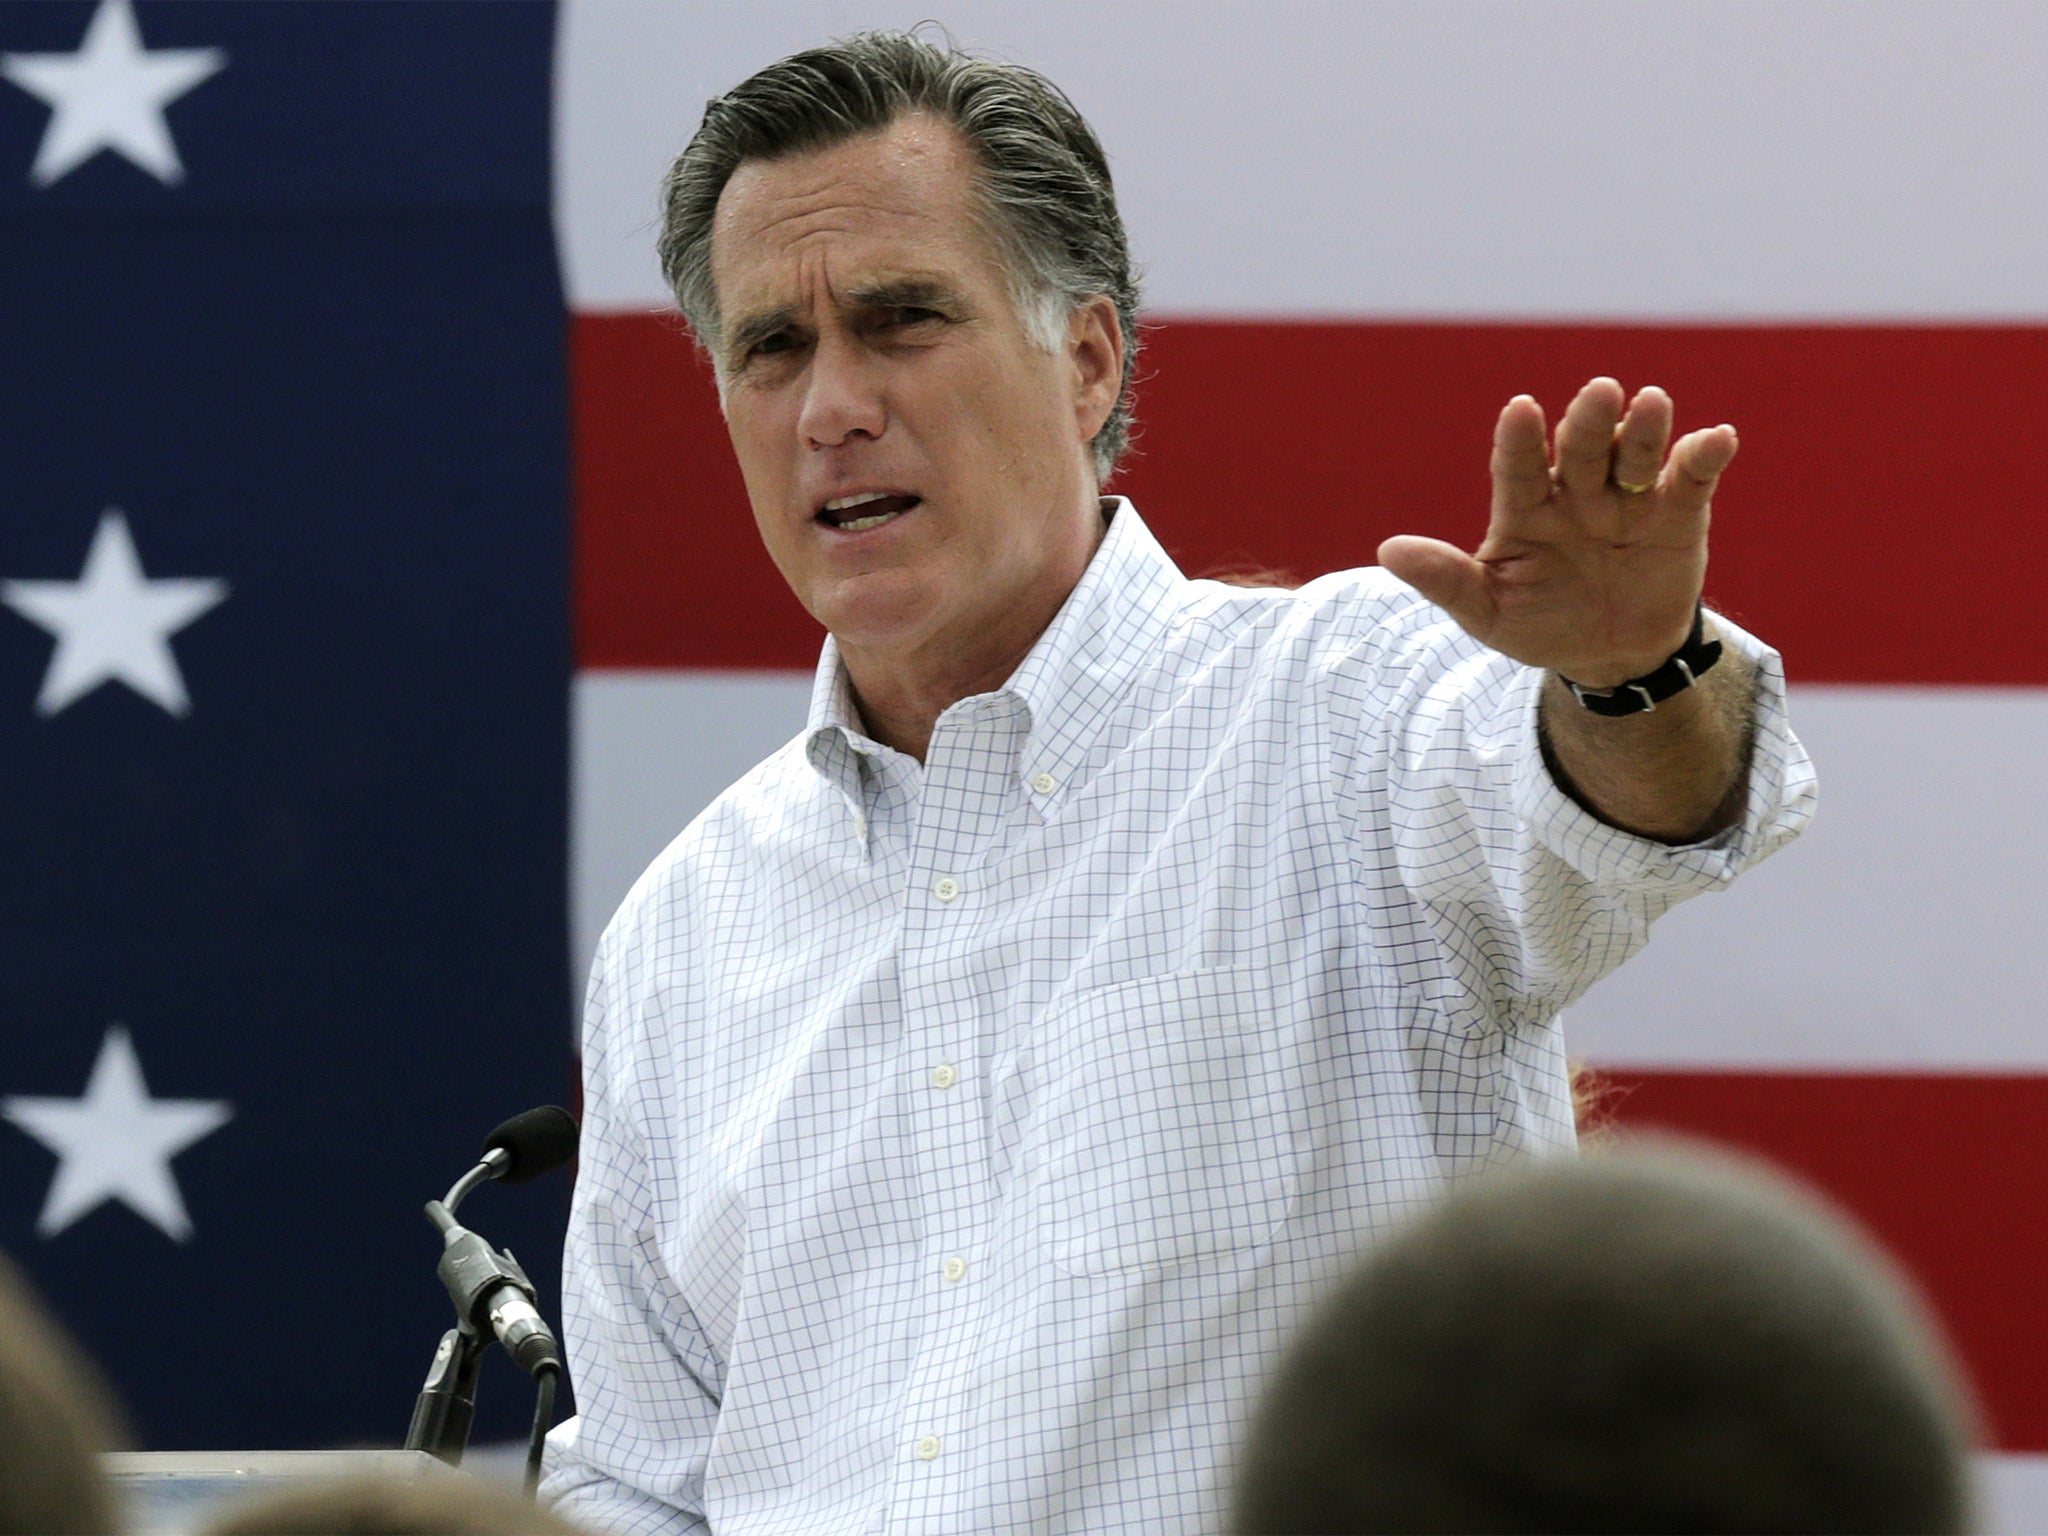 Mitt Romney, the Republican nominee in 2012, has taken many by surprise with his intentions